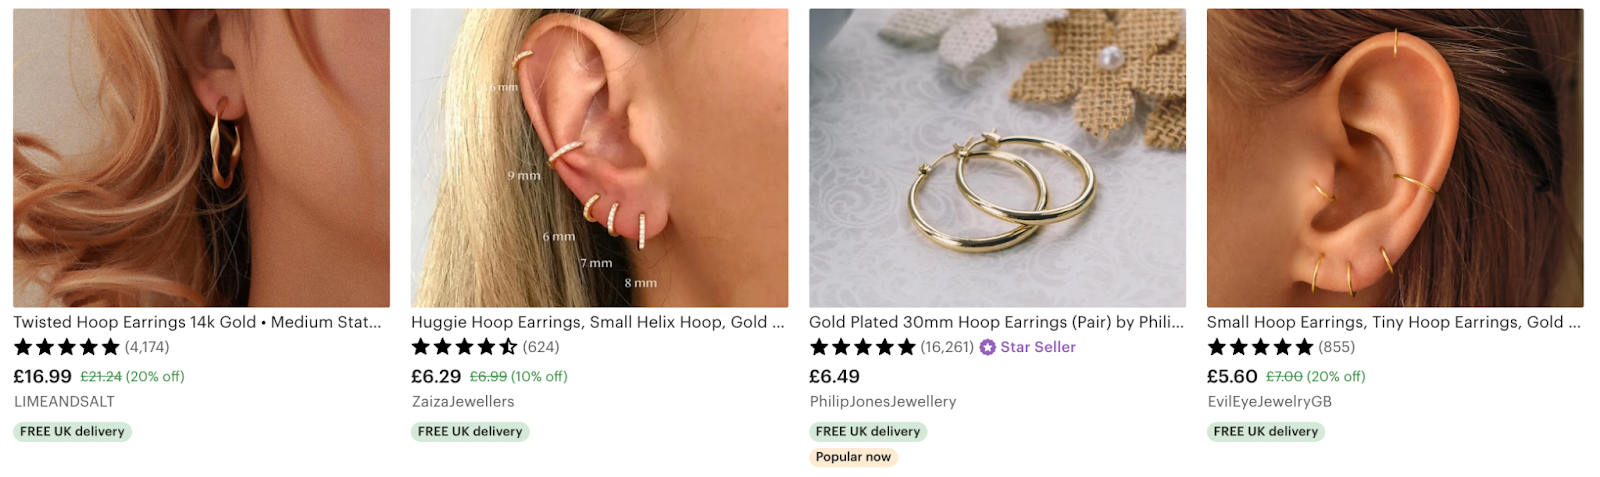 Etsy product carousel for gold hoop earrings that are “popular now”.